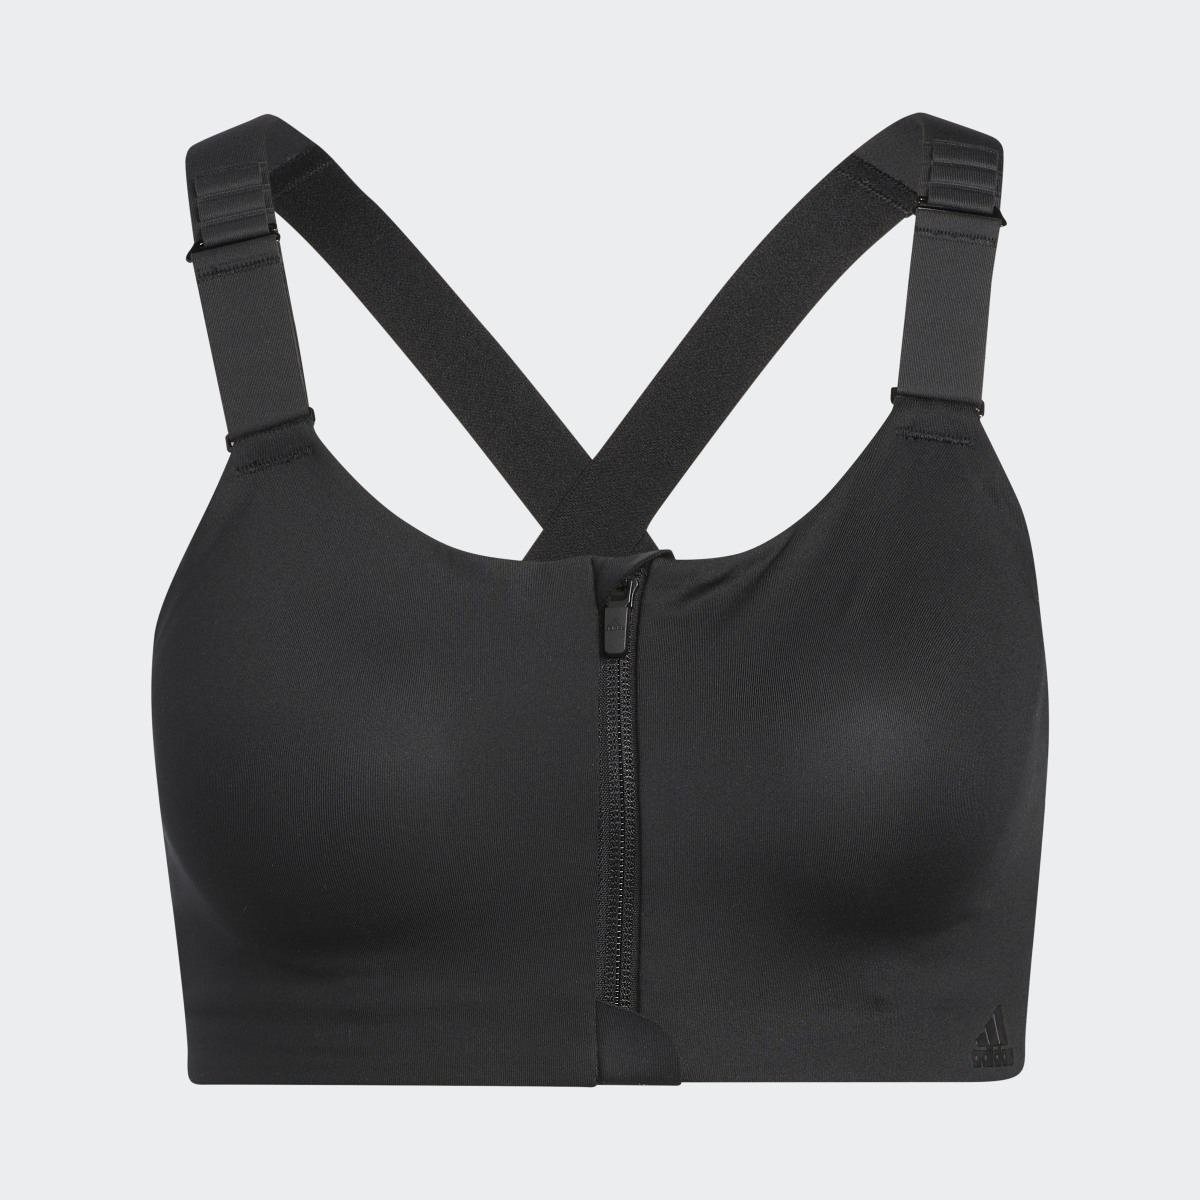 Adidas TLRD Impact Luxe Training High-Support Zip Bra. 7